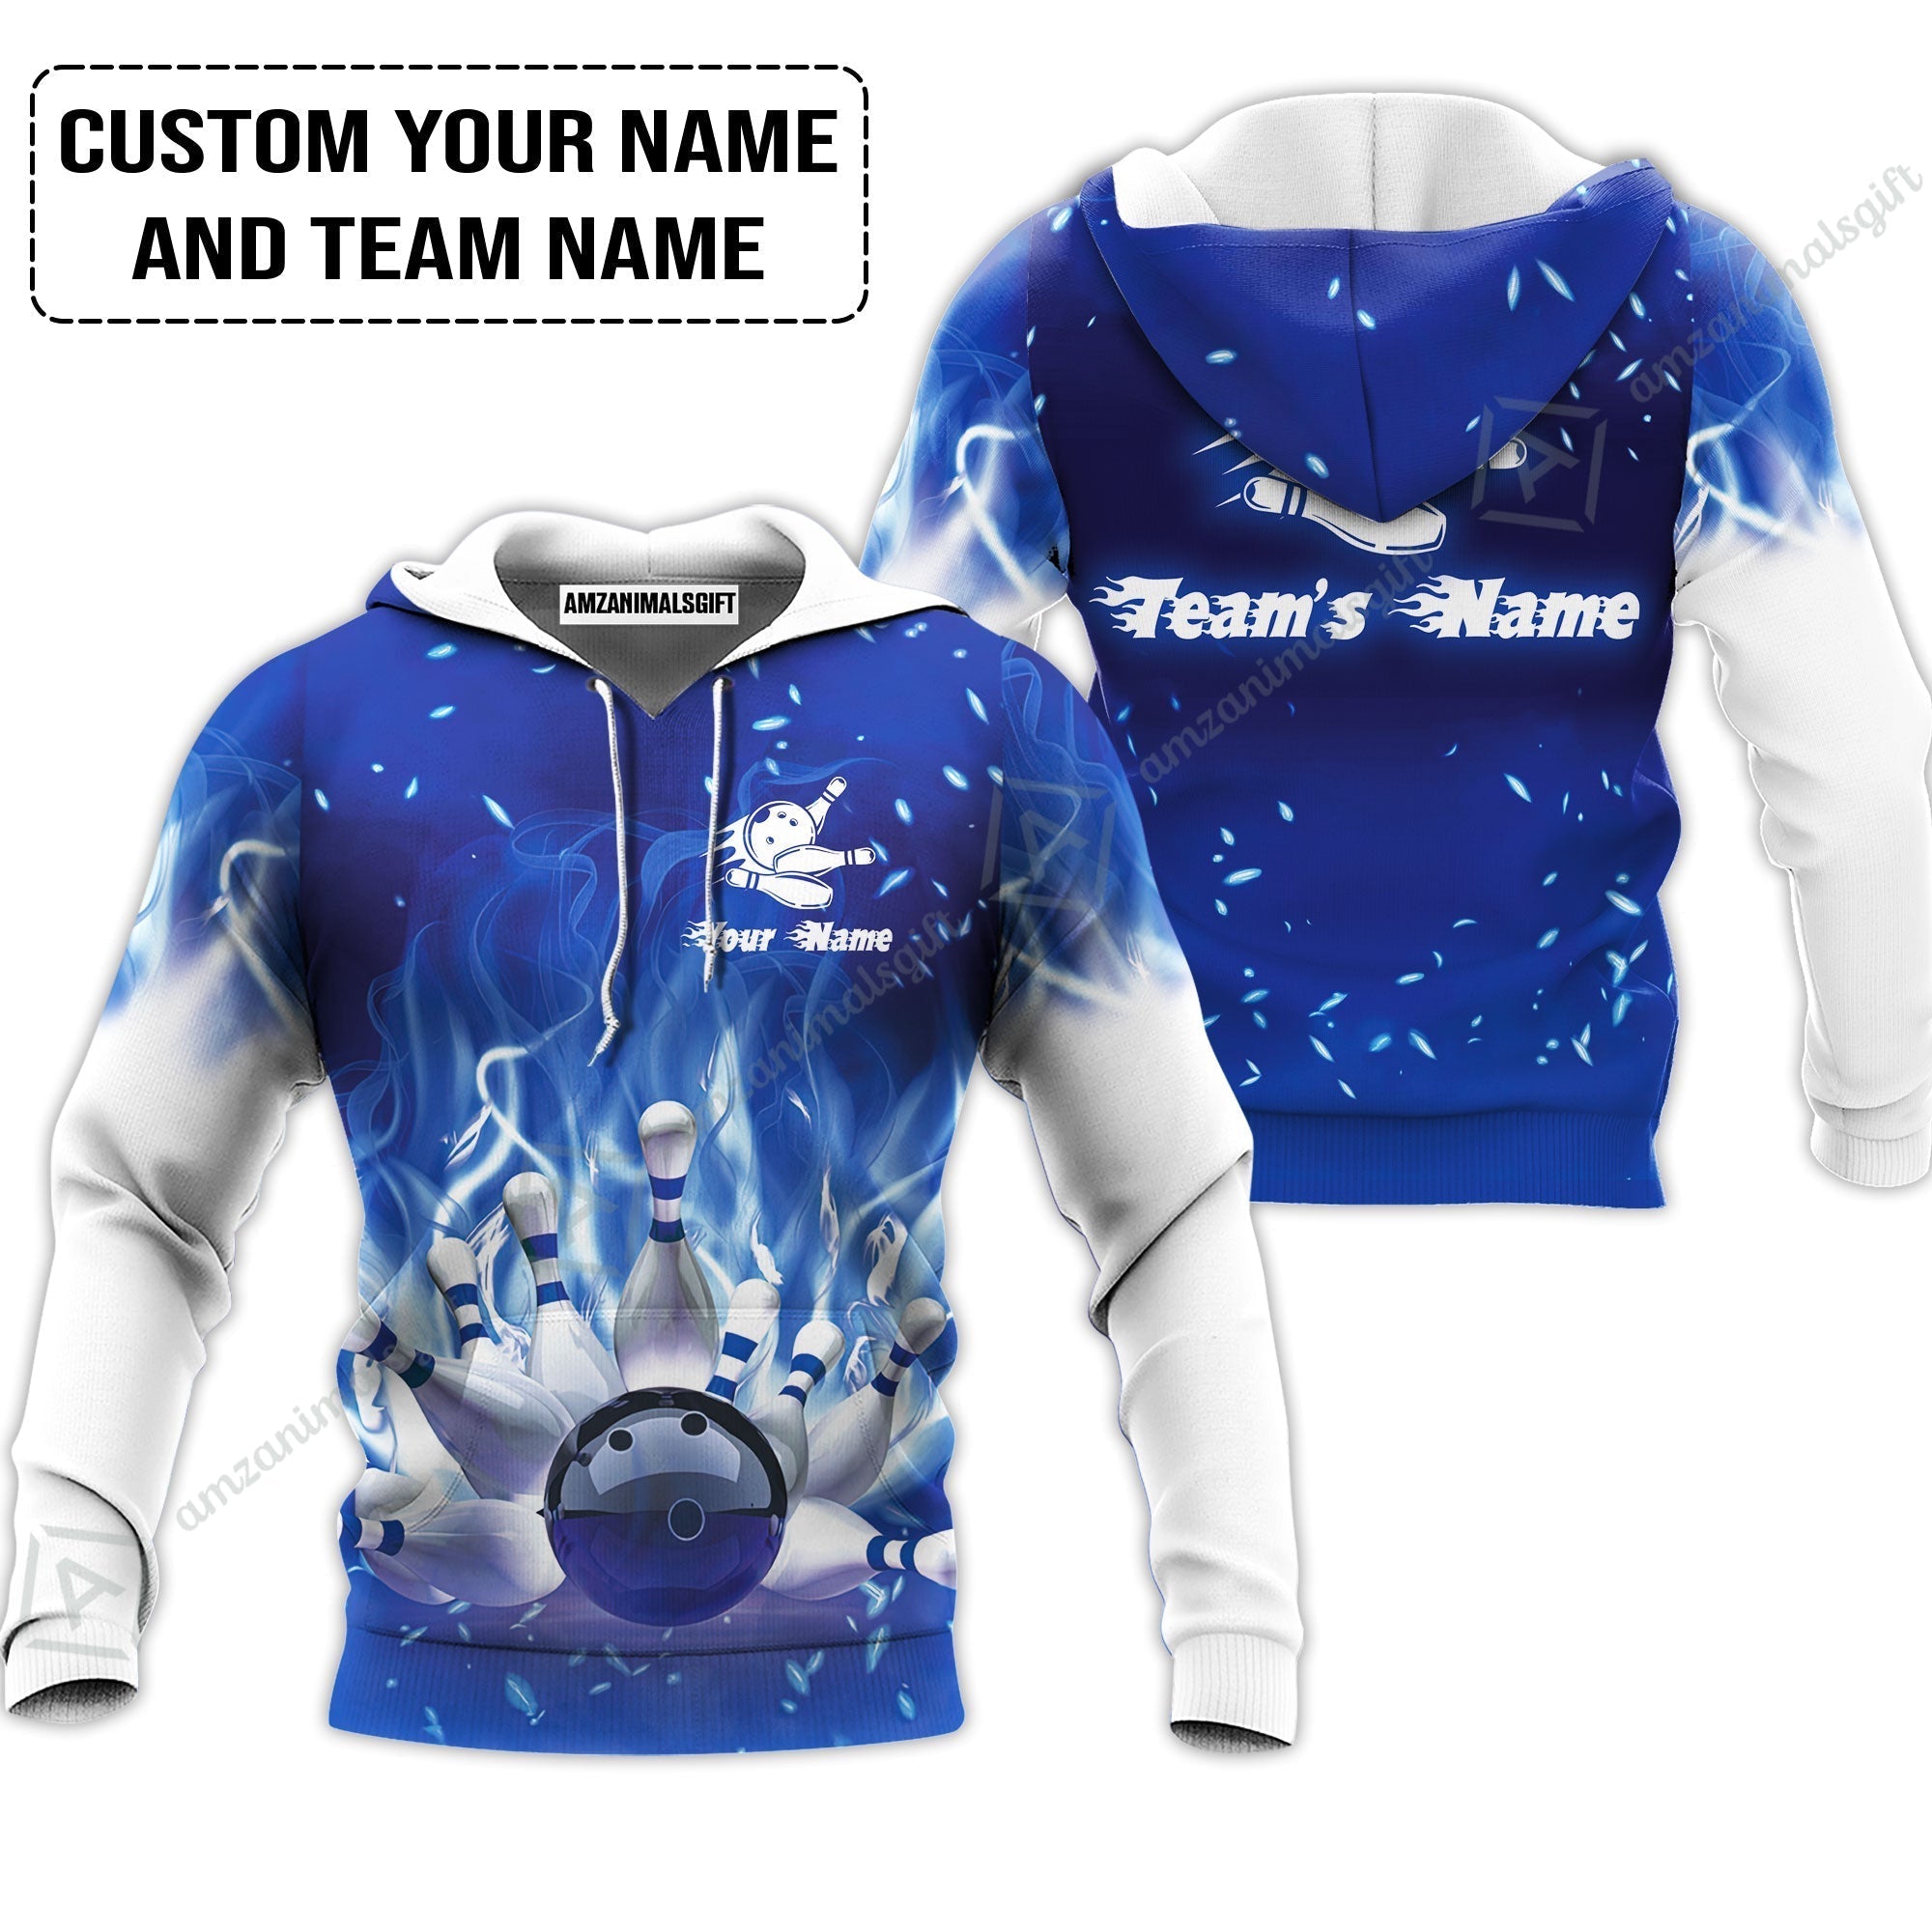 Hoodie Bowling Custom Name - Bowling On Blue Fire Personalized Bowling Hoodie